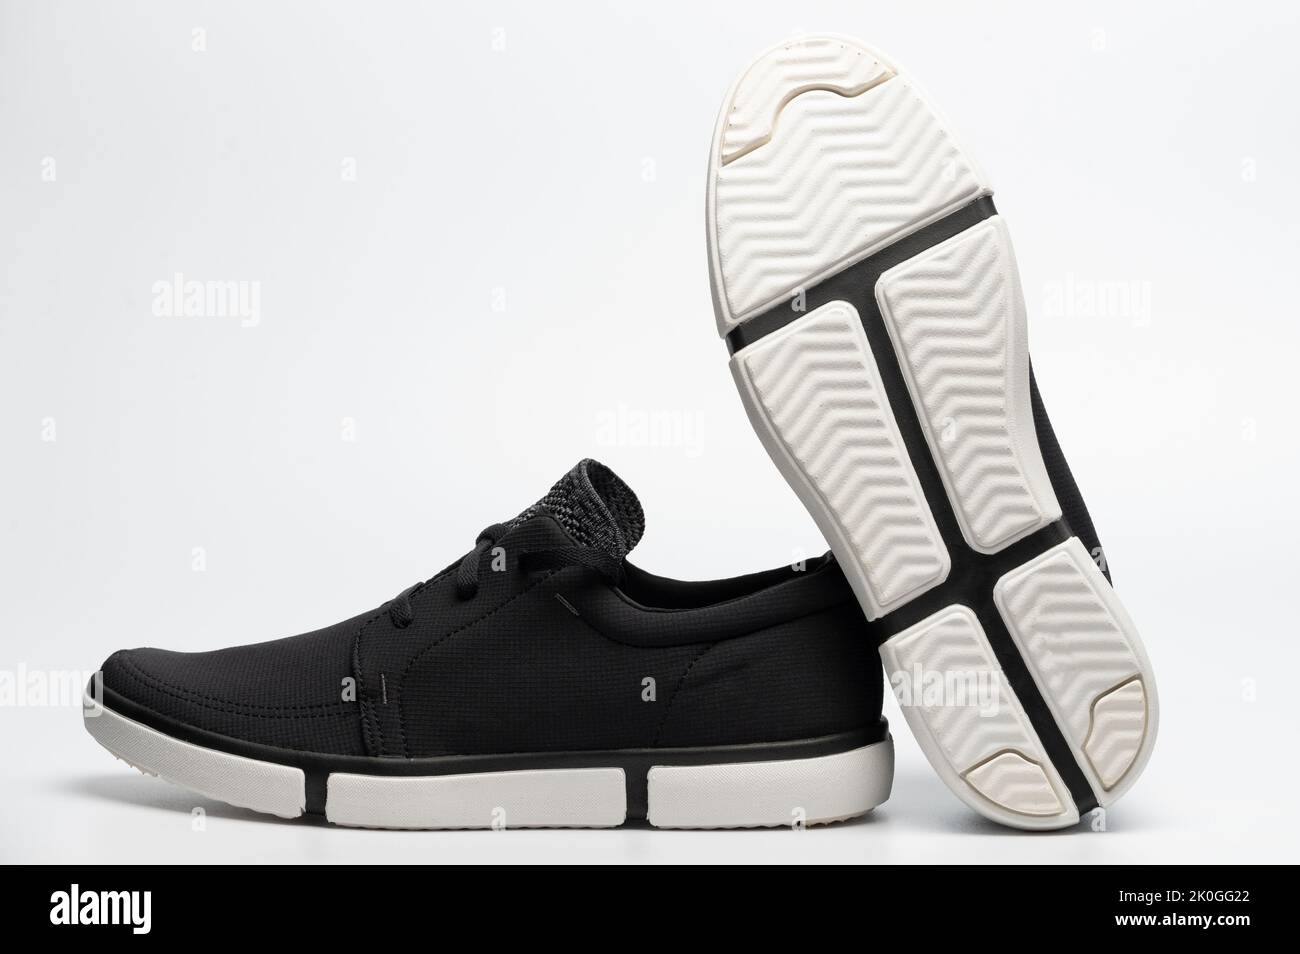 New comfortable black sneaker shoes with white sole isolated Stock Photo